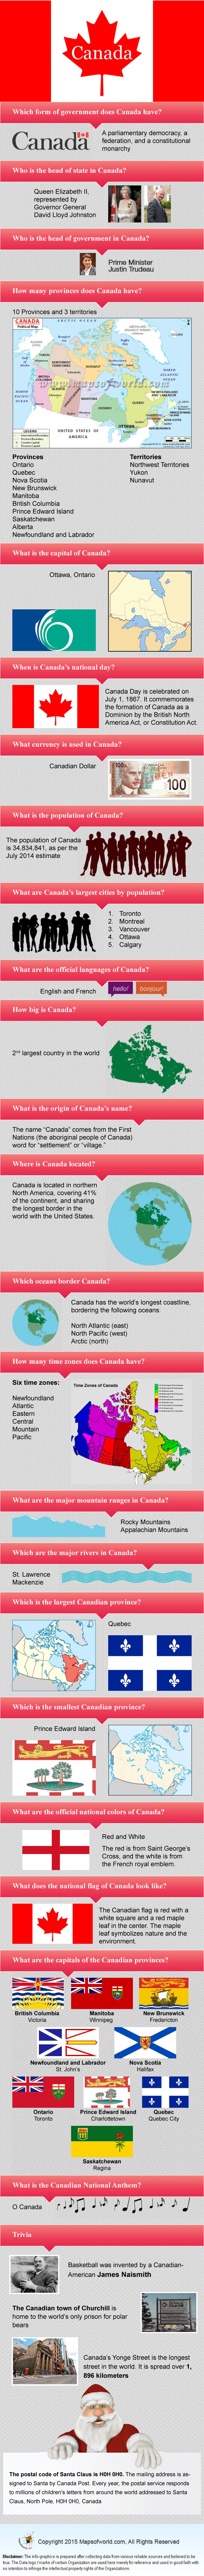 Canada Infographic, Infographic of Canada